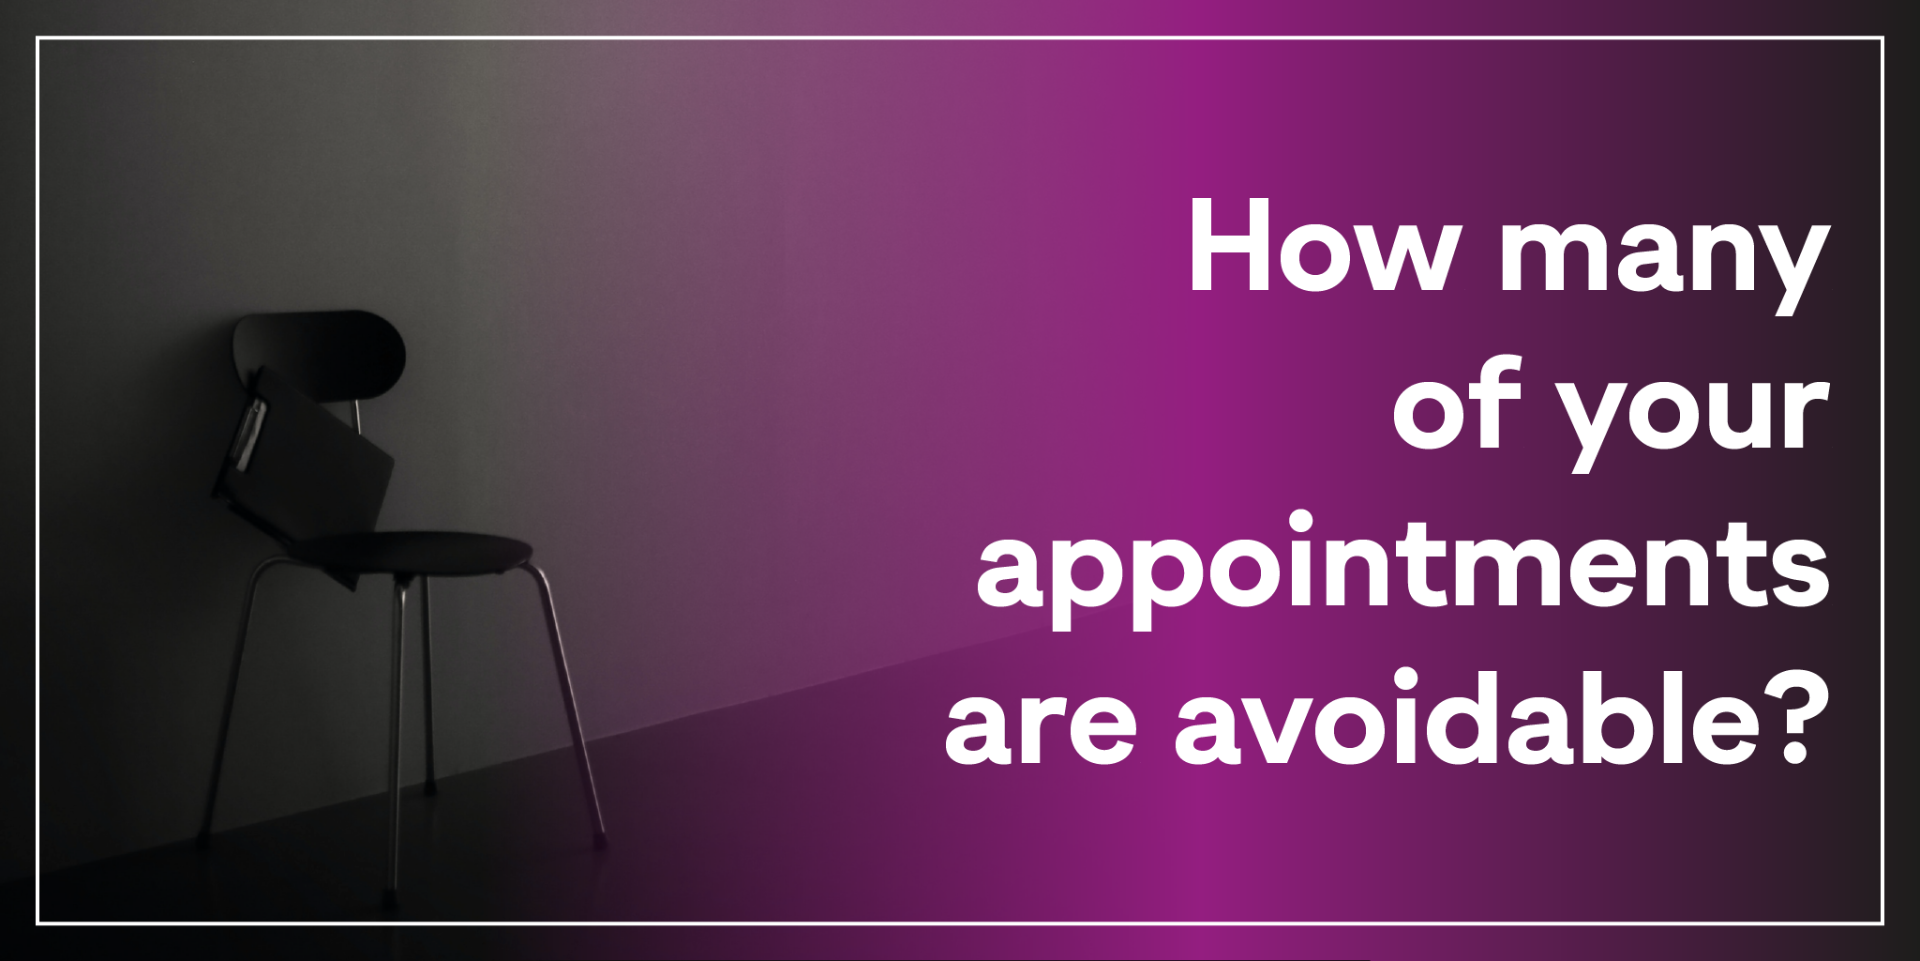 How many of your appointments are avoidable?